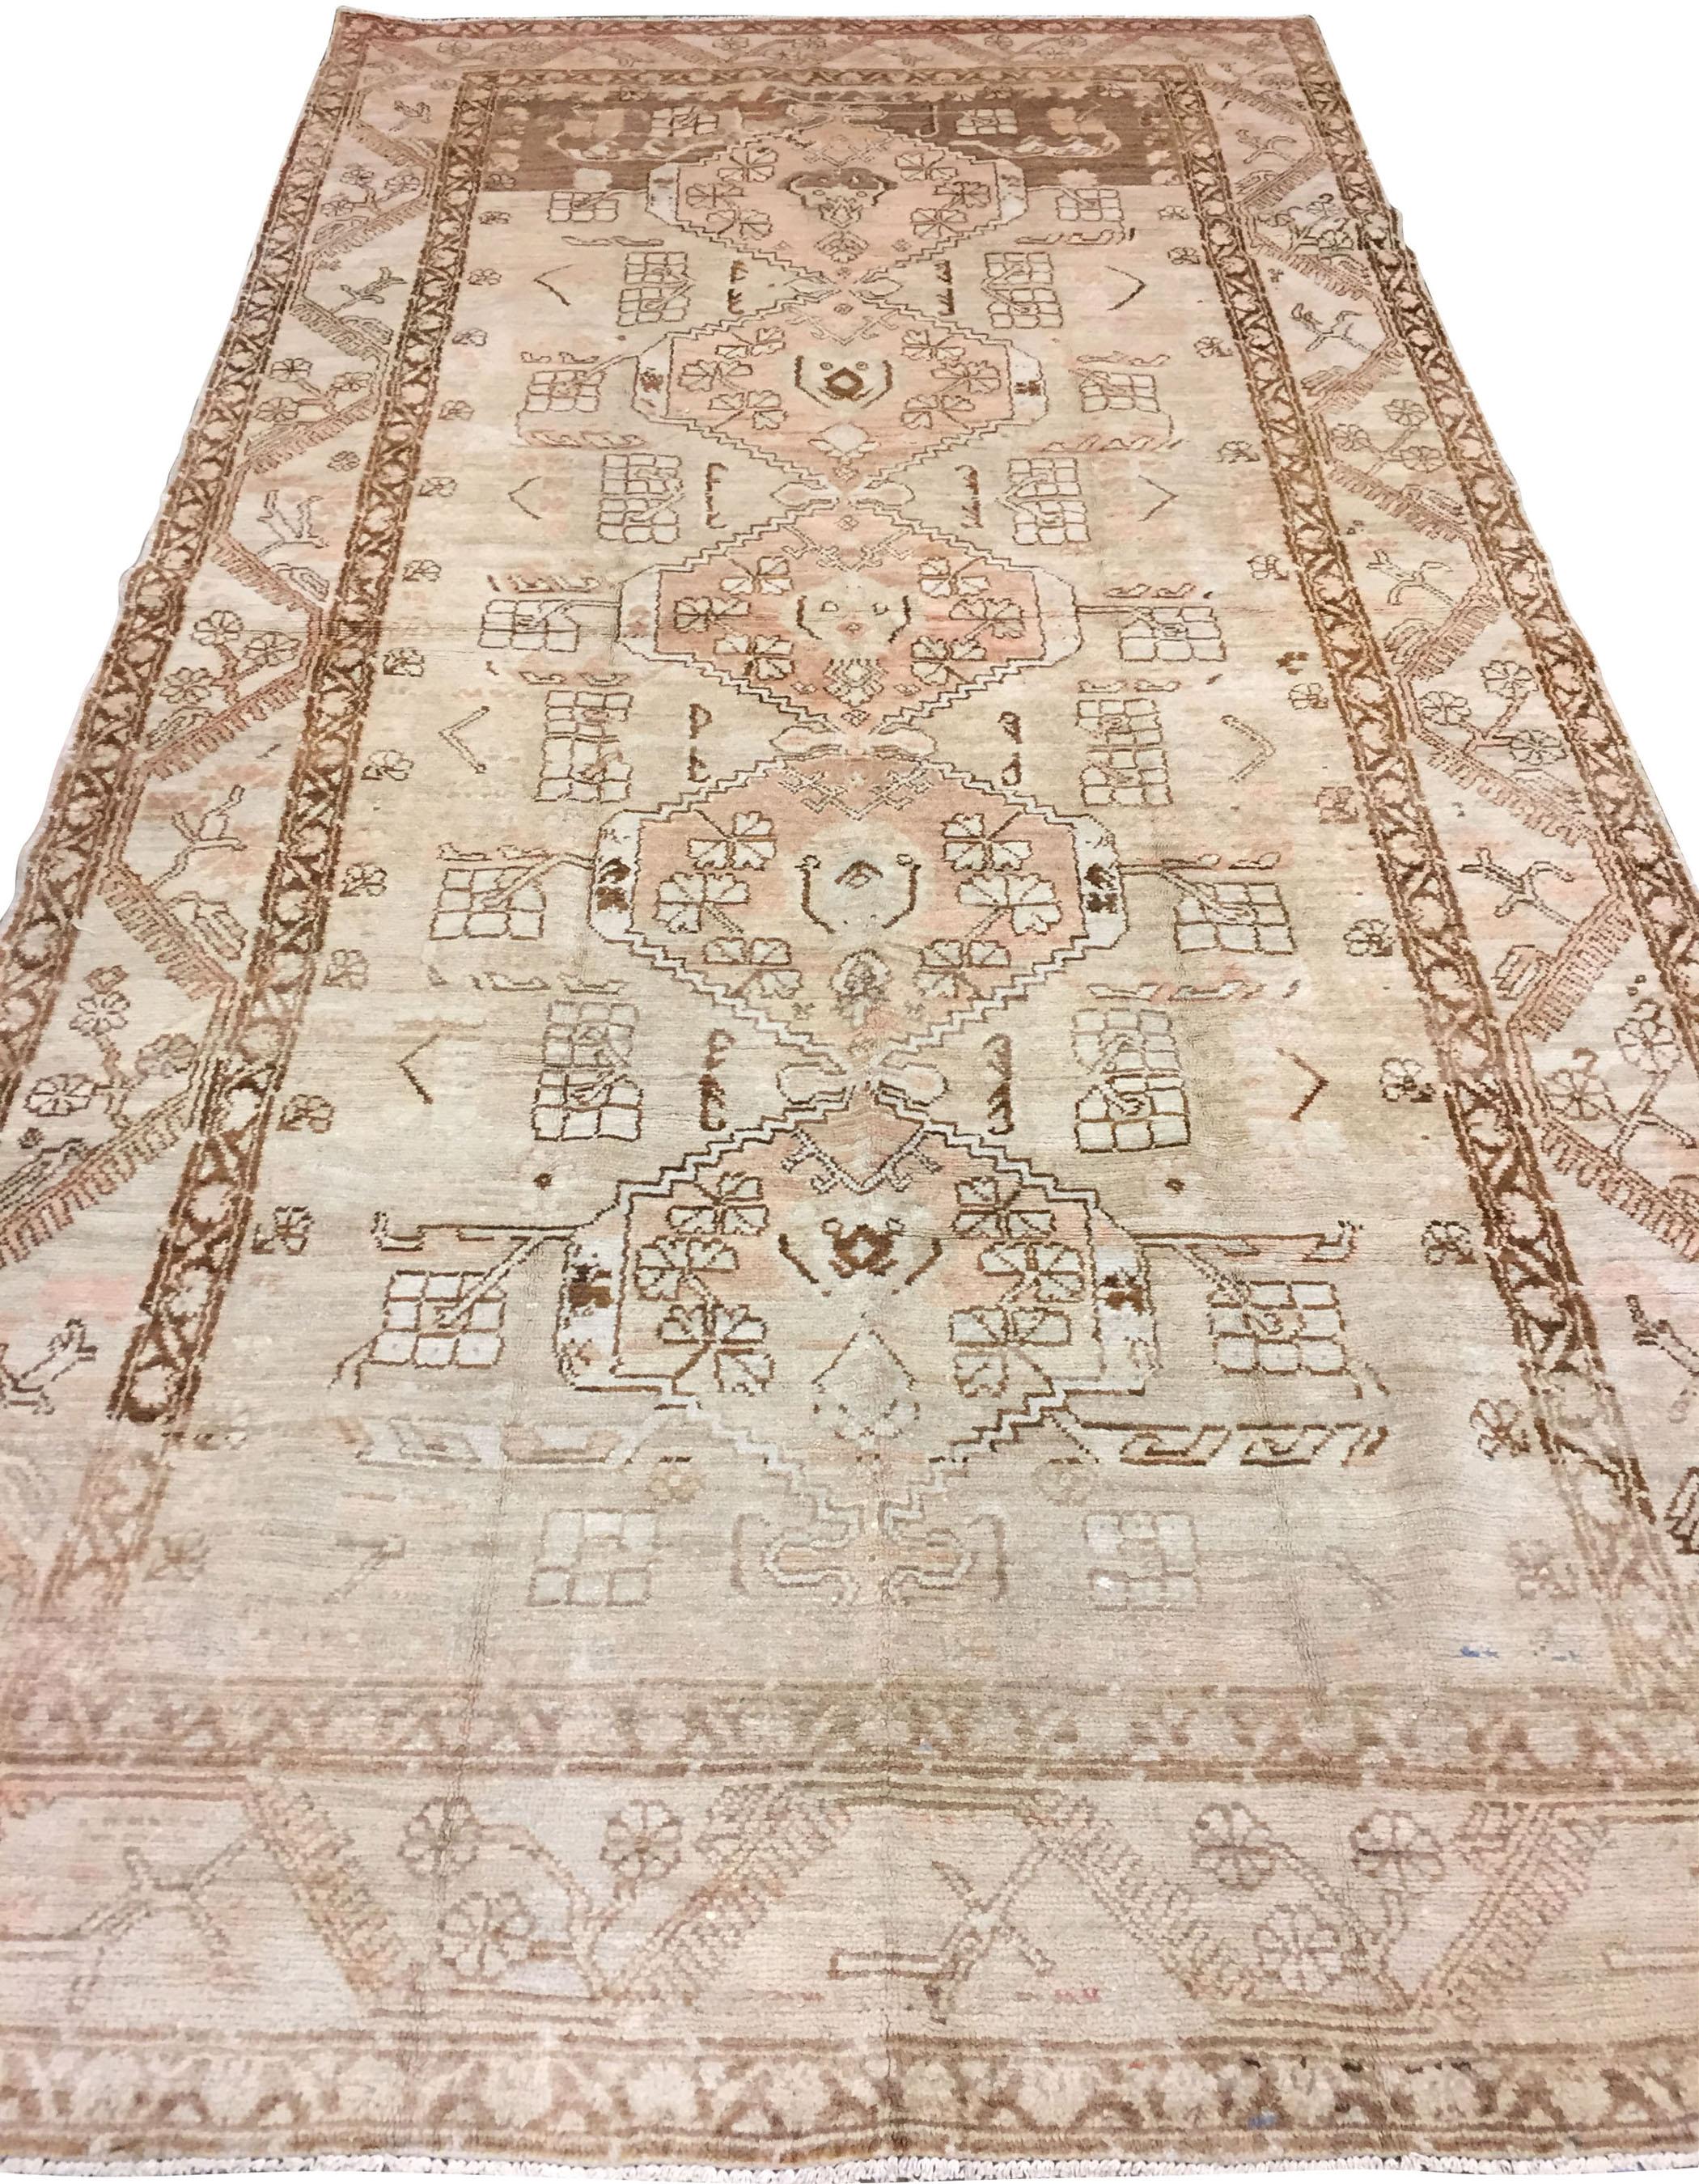 Vintage Turkish Oushak rug 4'9 X 9'2. Hand-woven in Turkey where rug weaving is the culture rather than a business. Rugs from Turkey are known for the high quality of their wool their beautiful patterns and warm colors. These designer favorites will